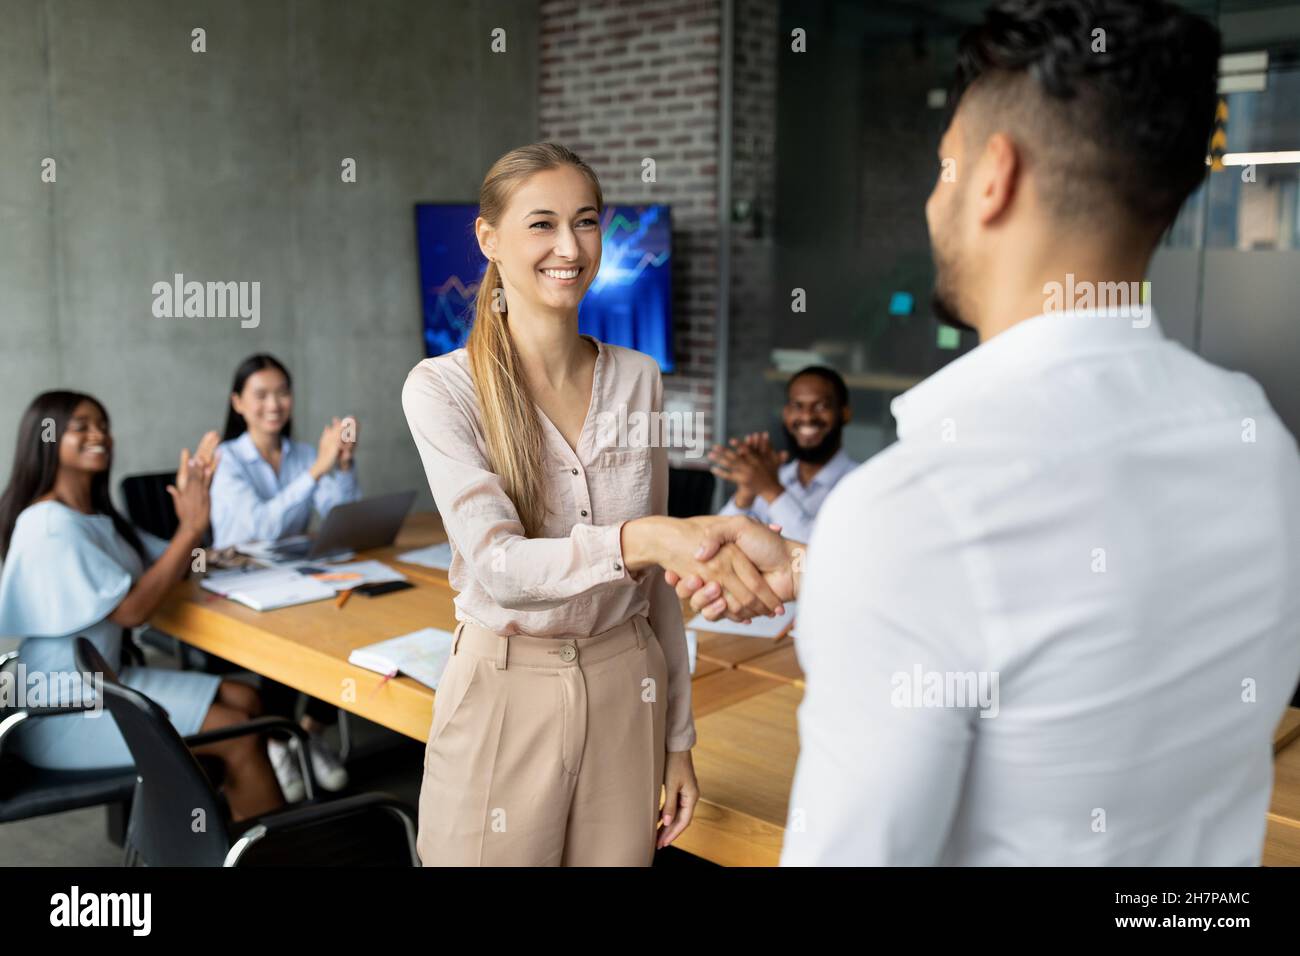 Welcome To Team. Boss Shaking Hands With New Female Employee In Office Stock Photo